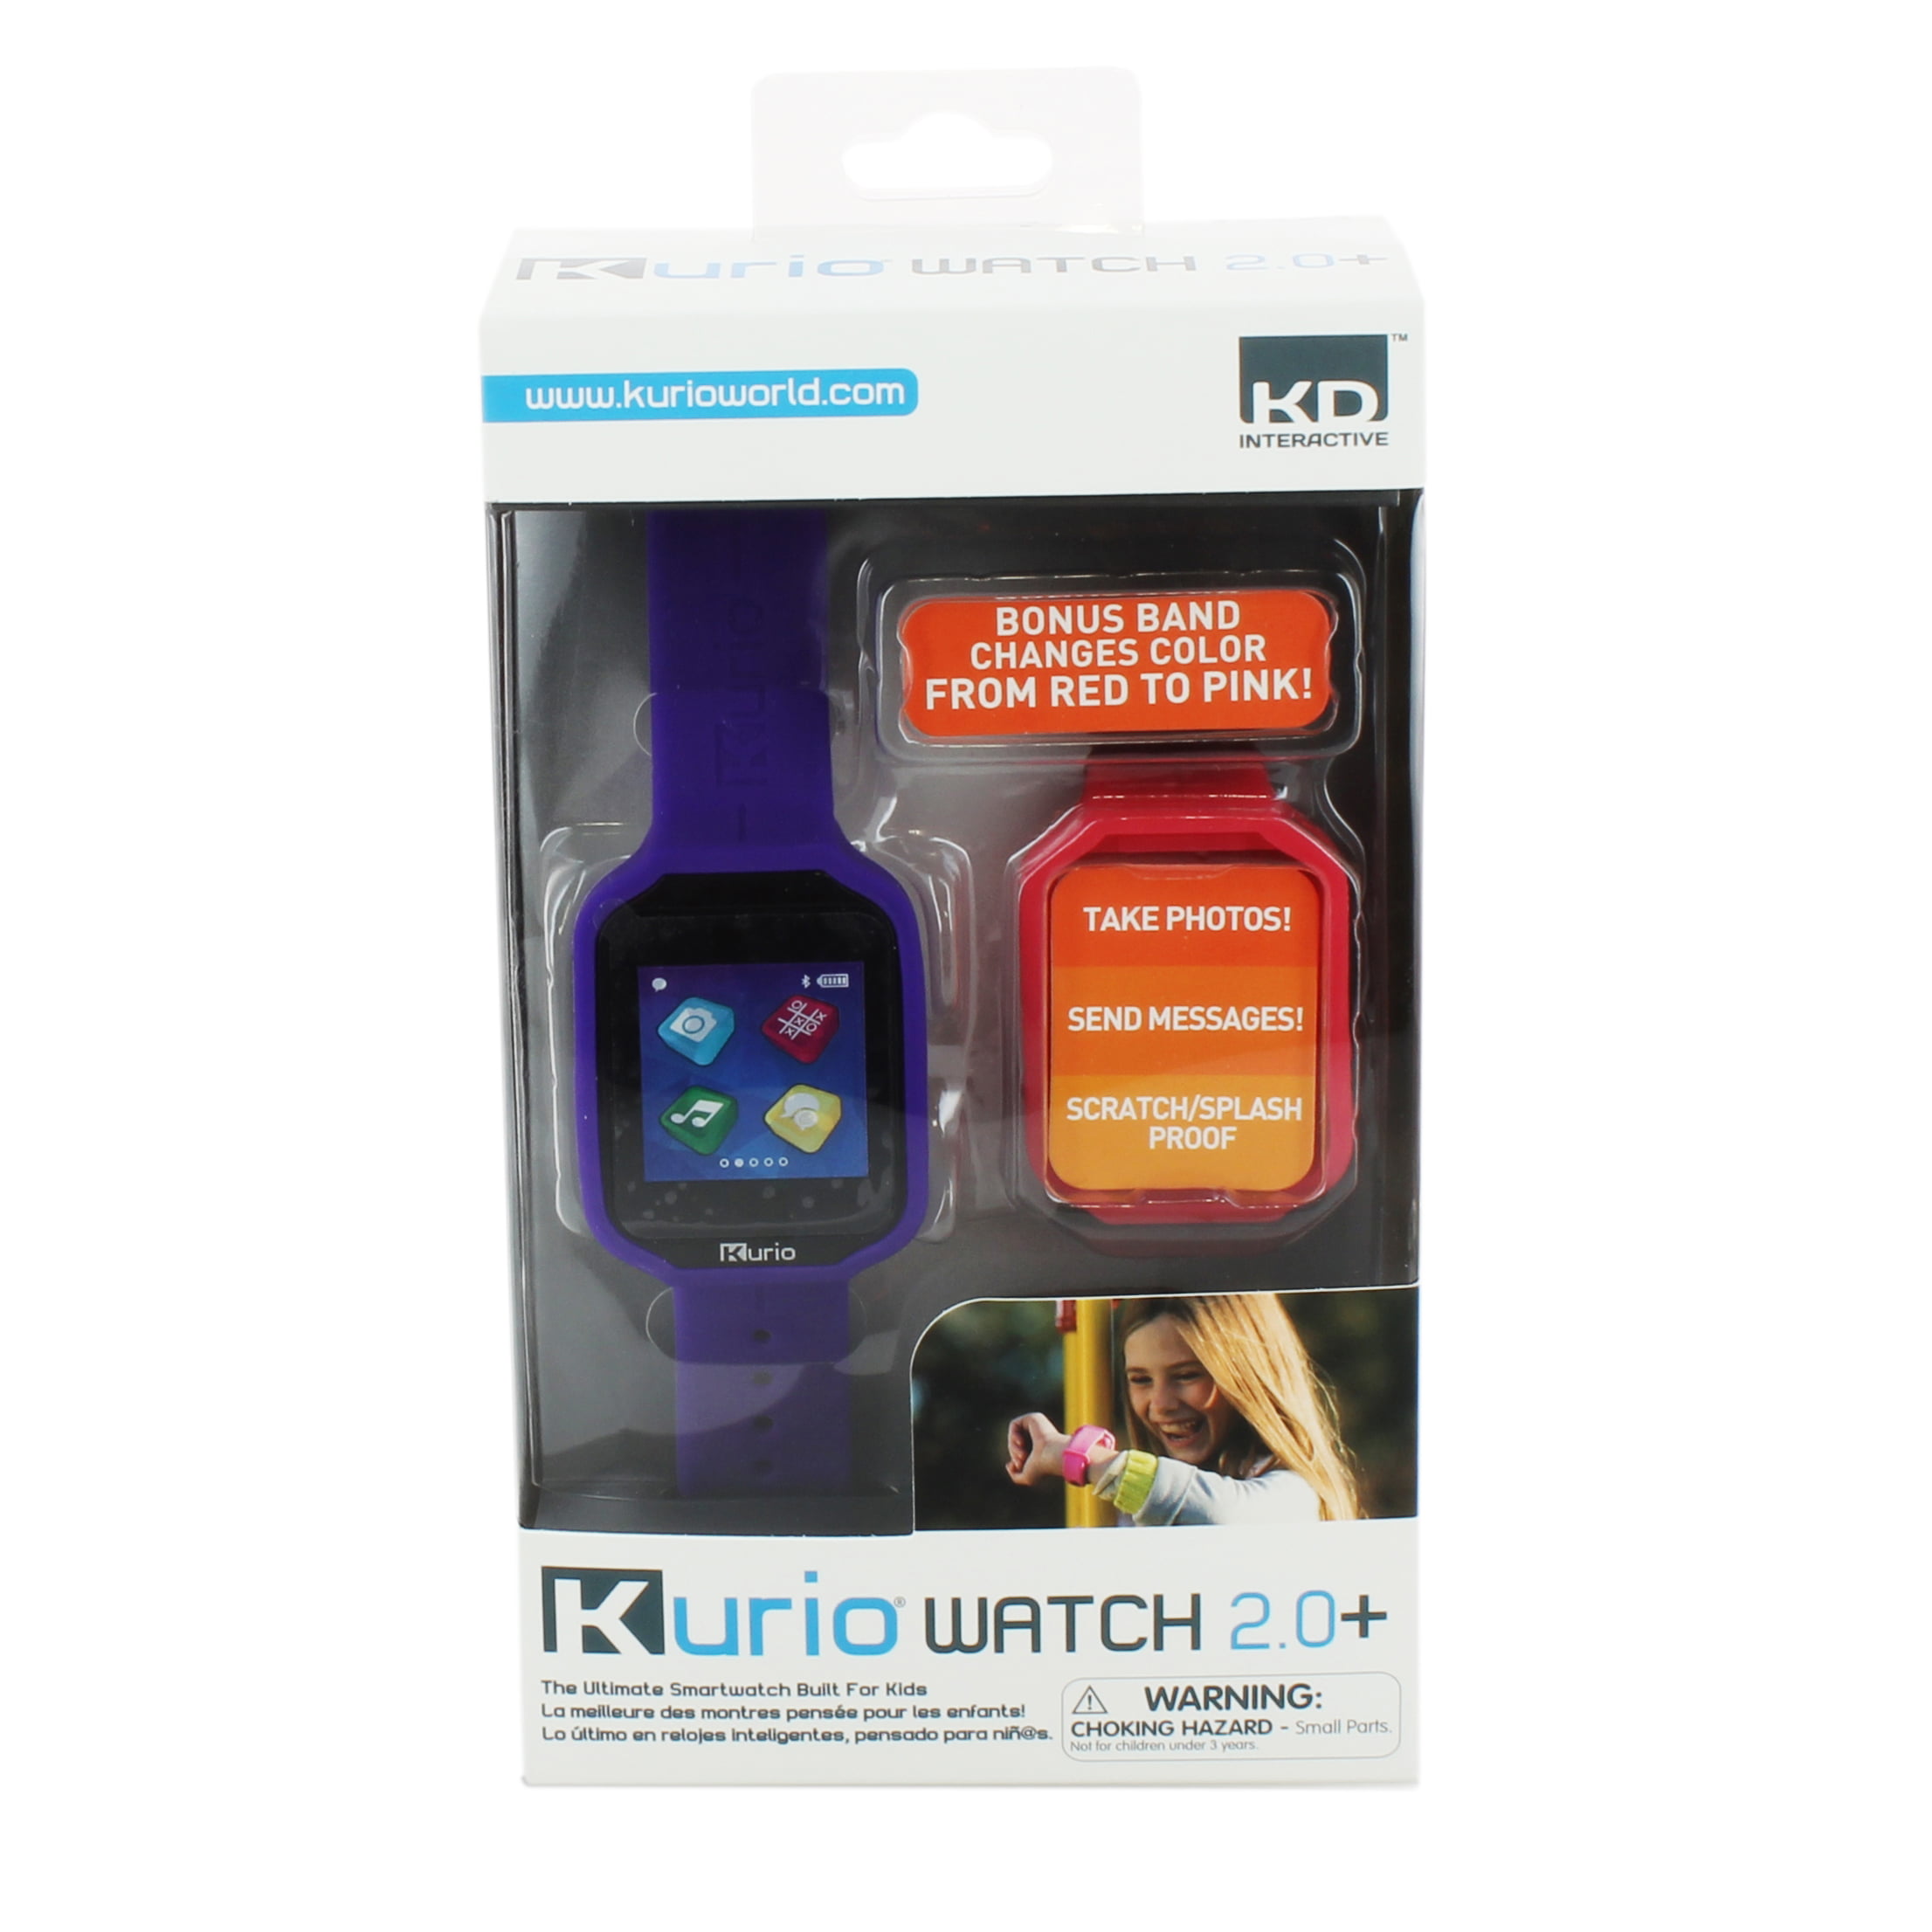 Kurio &&nbsp;KD Interactive Watch 2.0+ Smartwatch Built for Kids with 2 Bands, Purple and Red/Pink Change